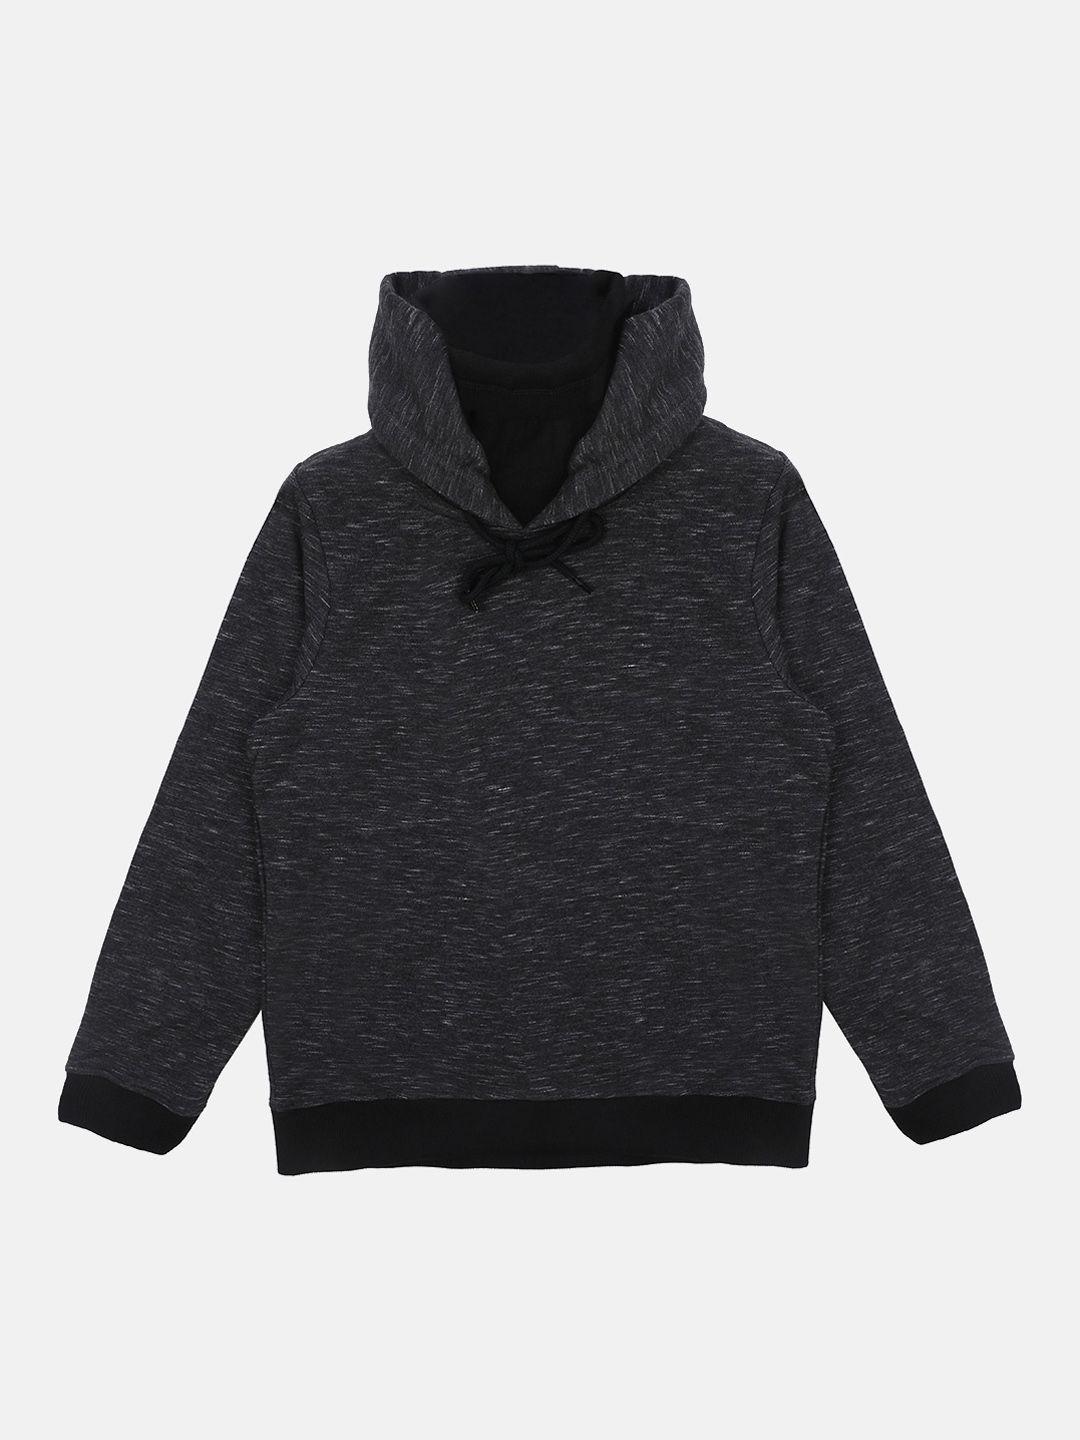 wear-your-mind-boys-black-solid-hooded-sweatshirt-with-attached-face-covering